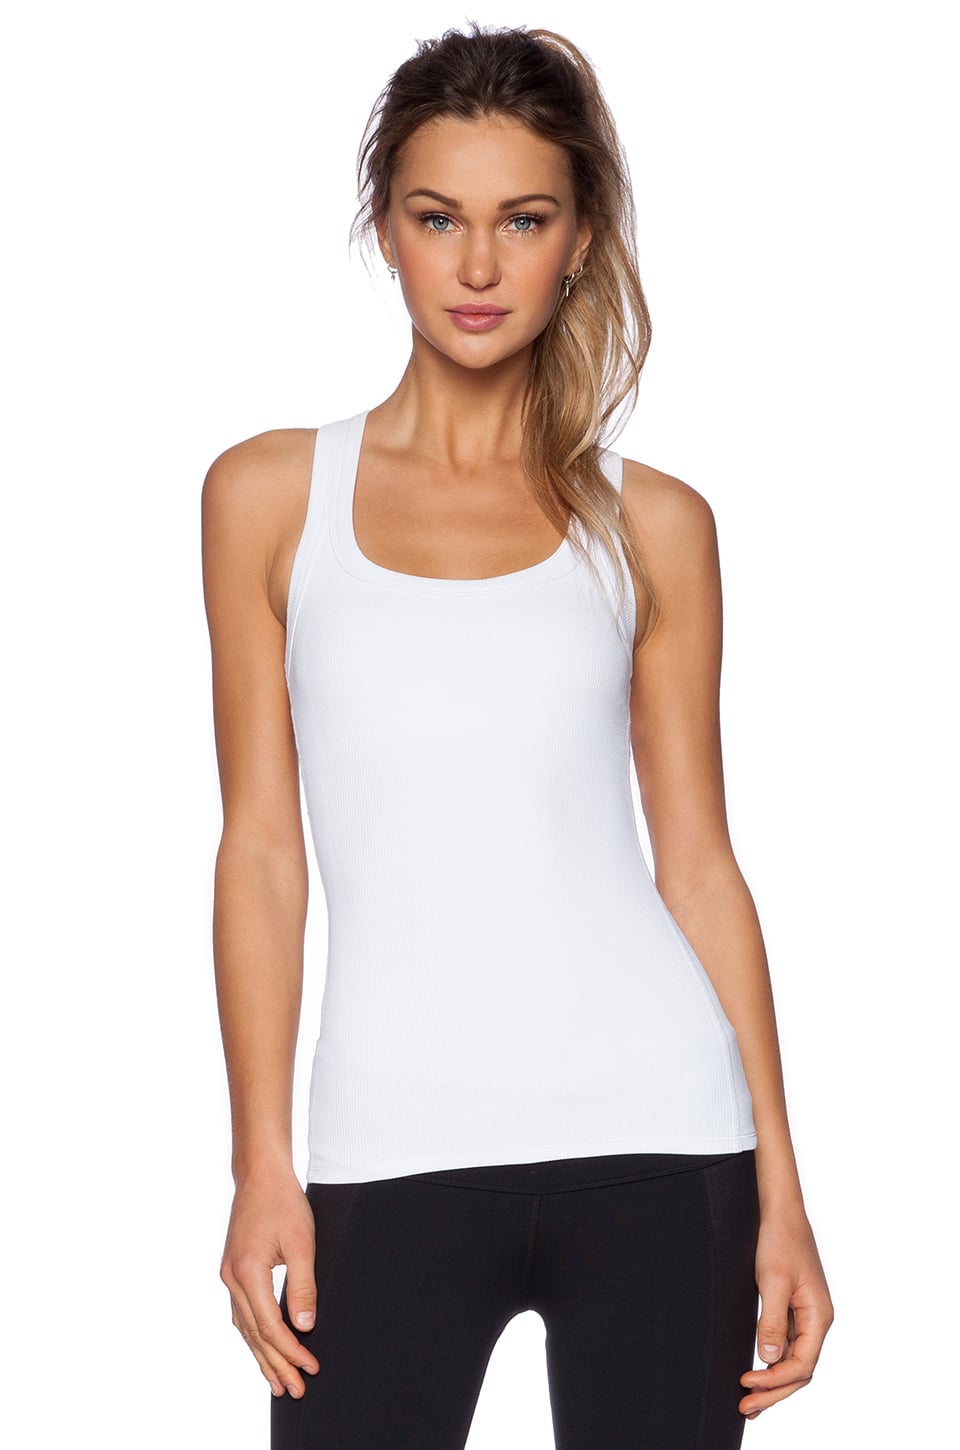 The Best Tank Tops For Women